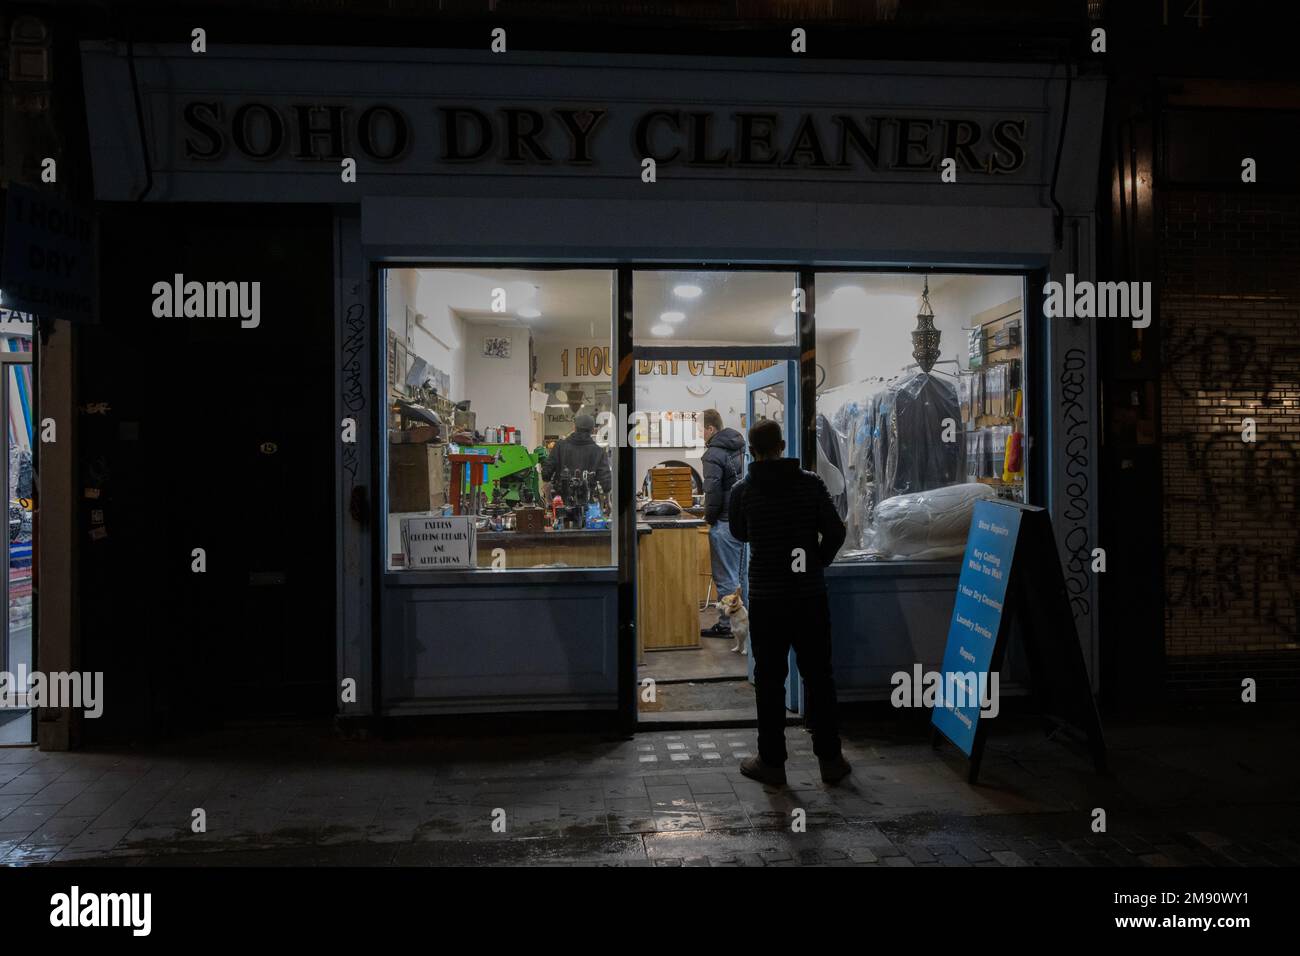 Soho Dry Cleaners, Berwick Street, Soho, West End, Londres, Angleterre, Royaume-Uni Banque D'Images